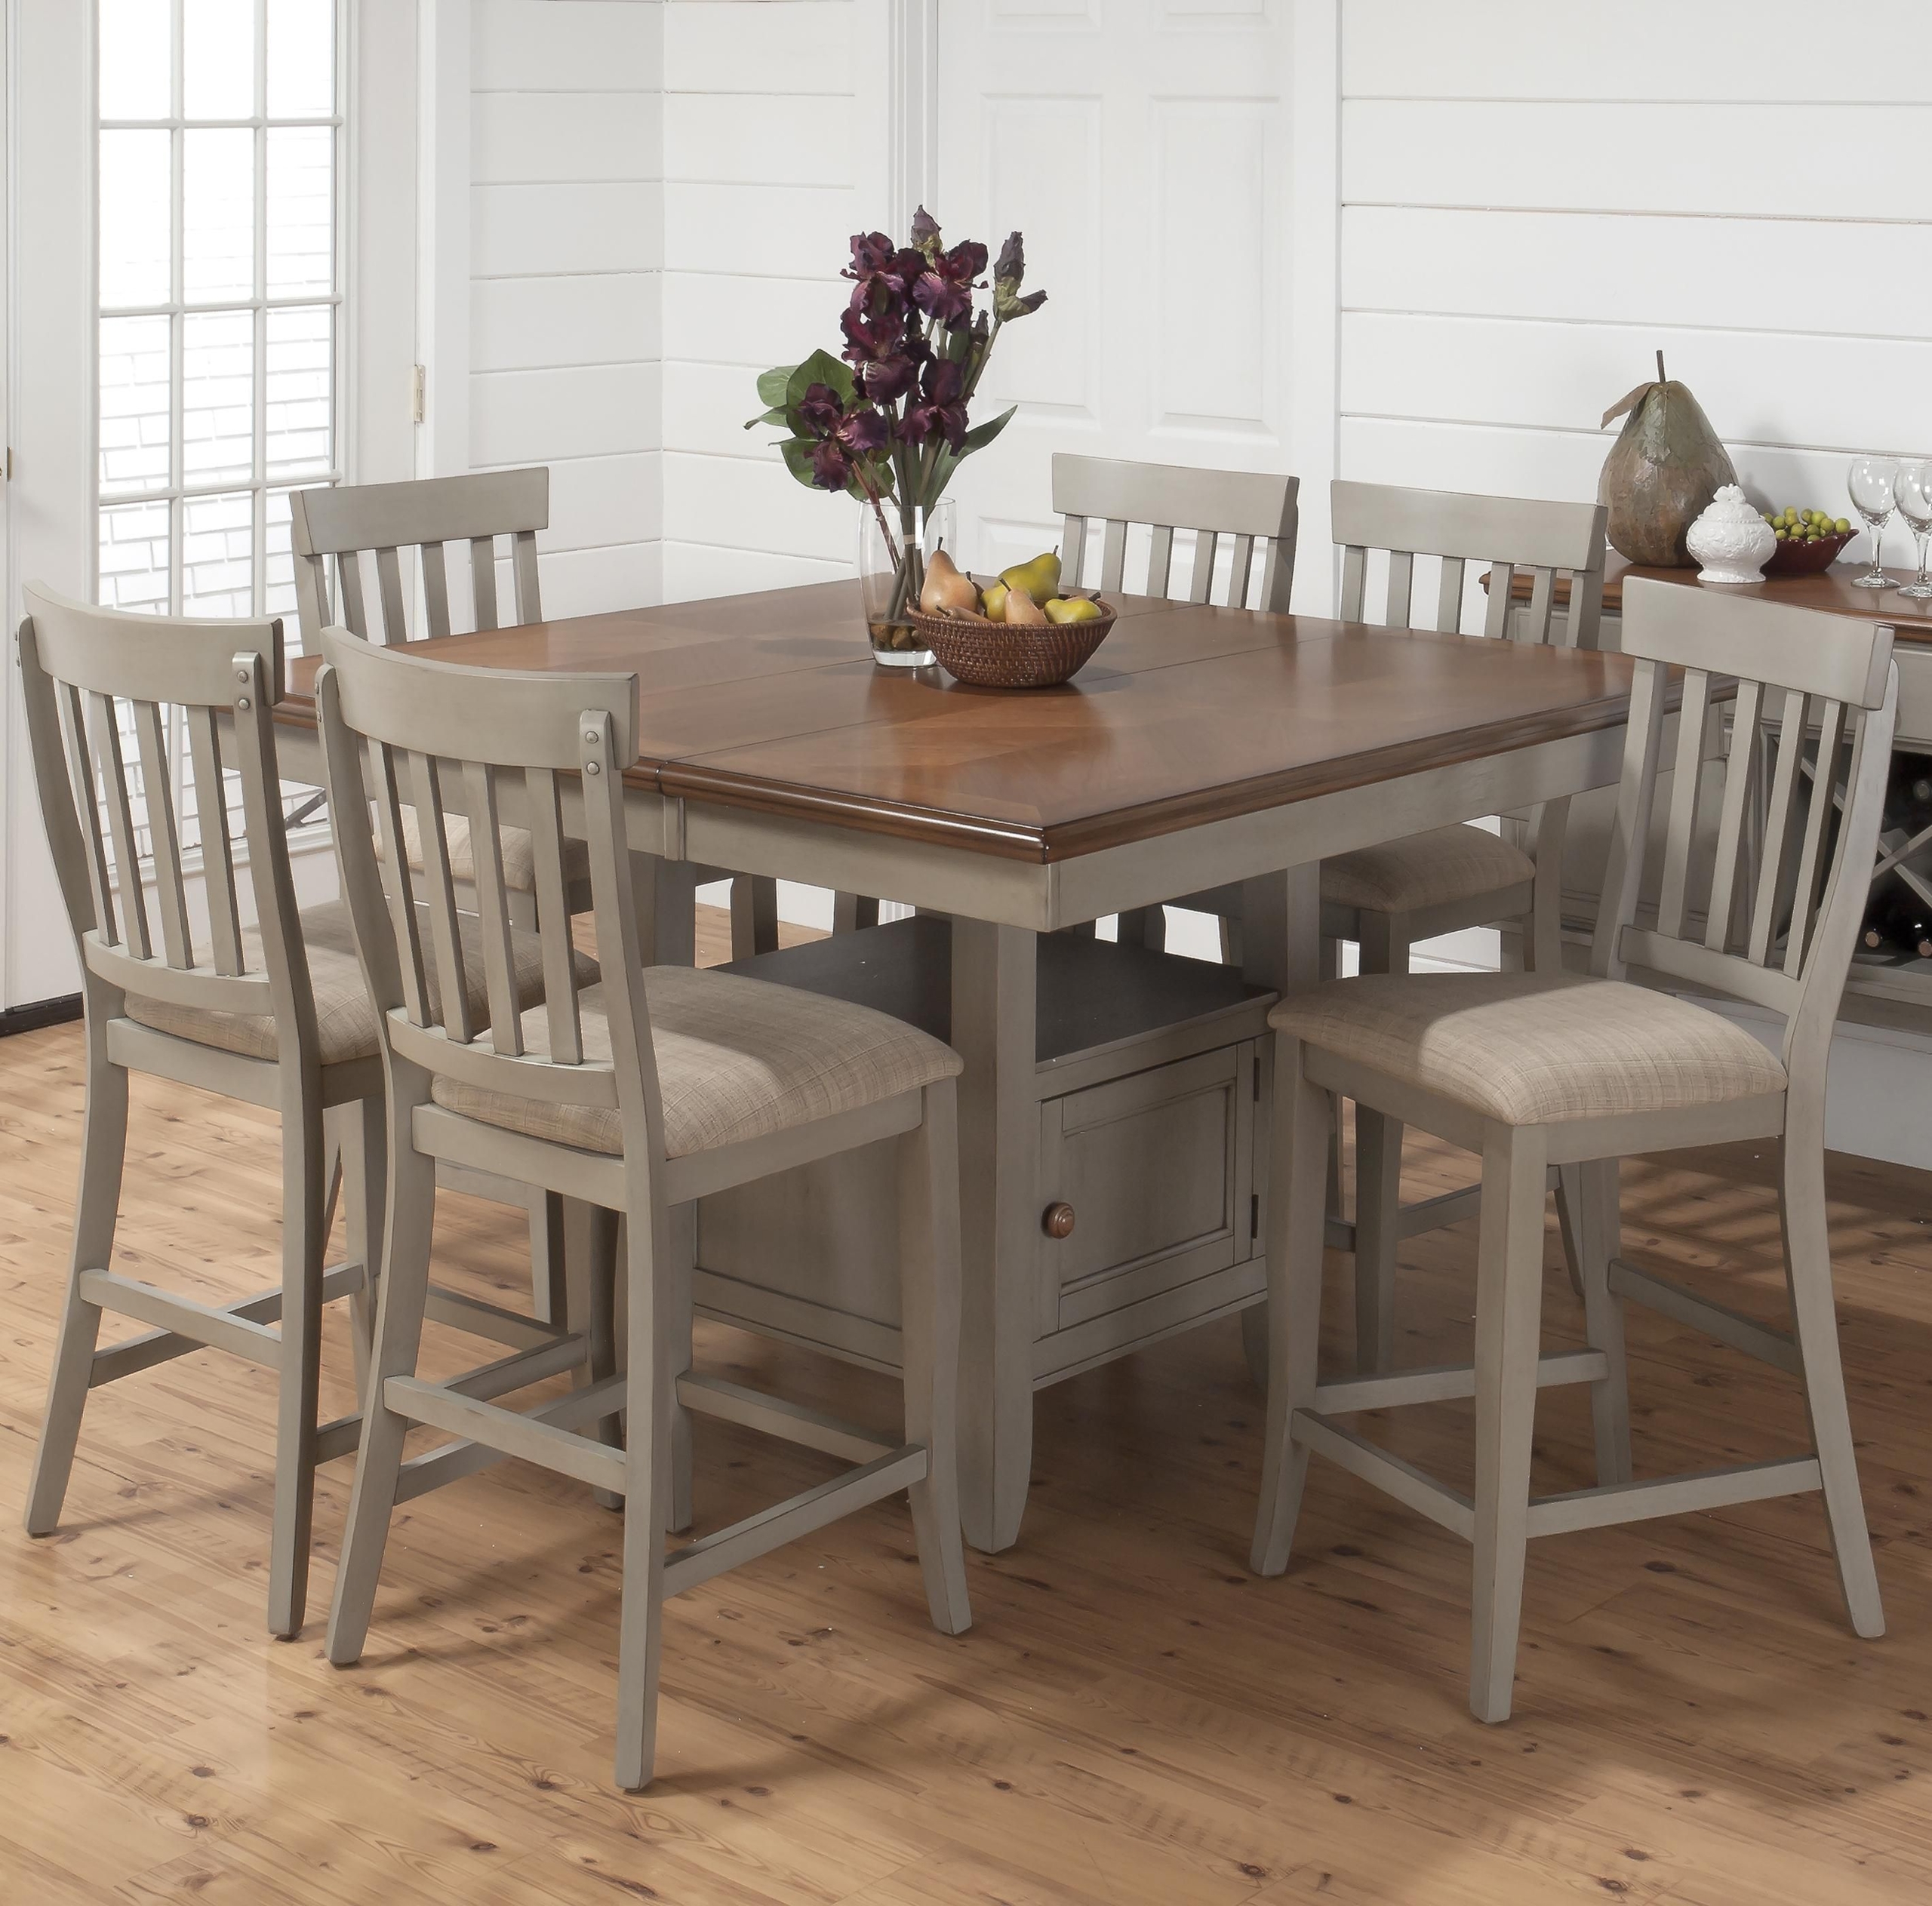 Light wood counter height dining sets